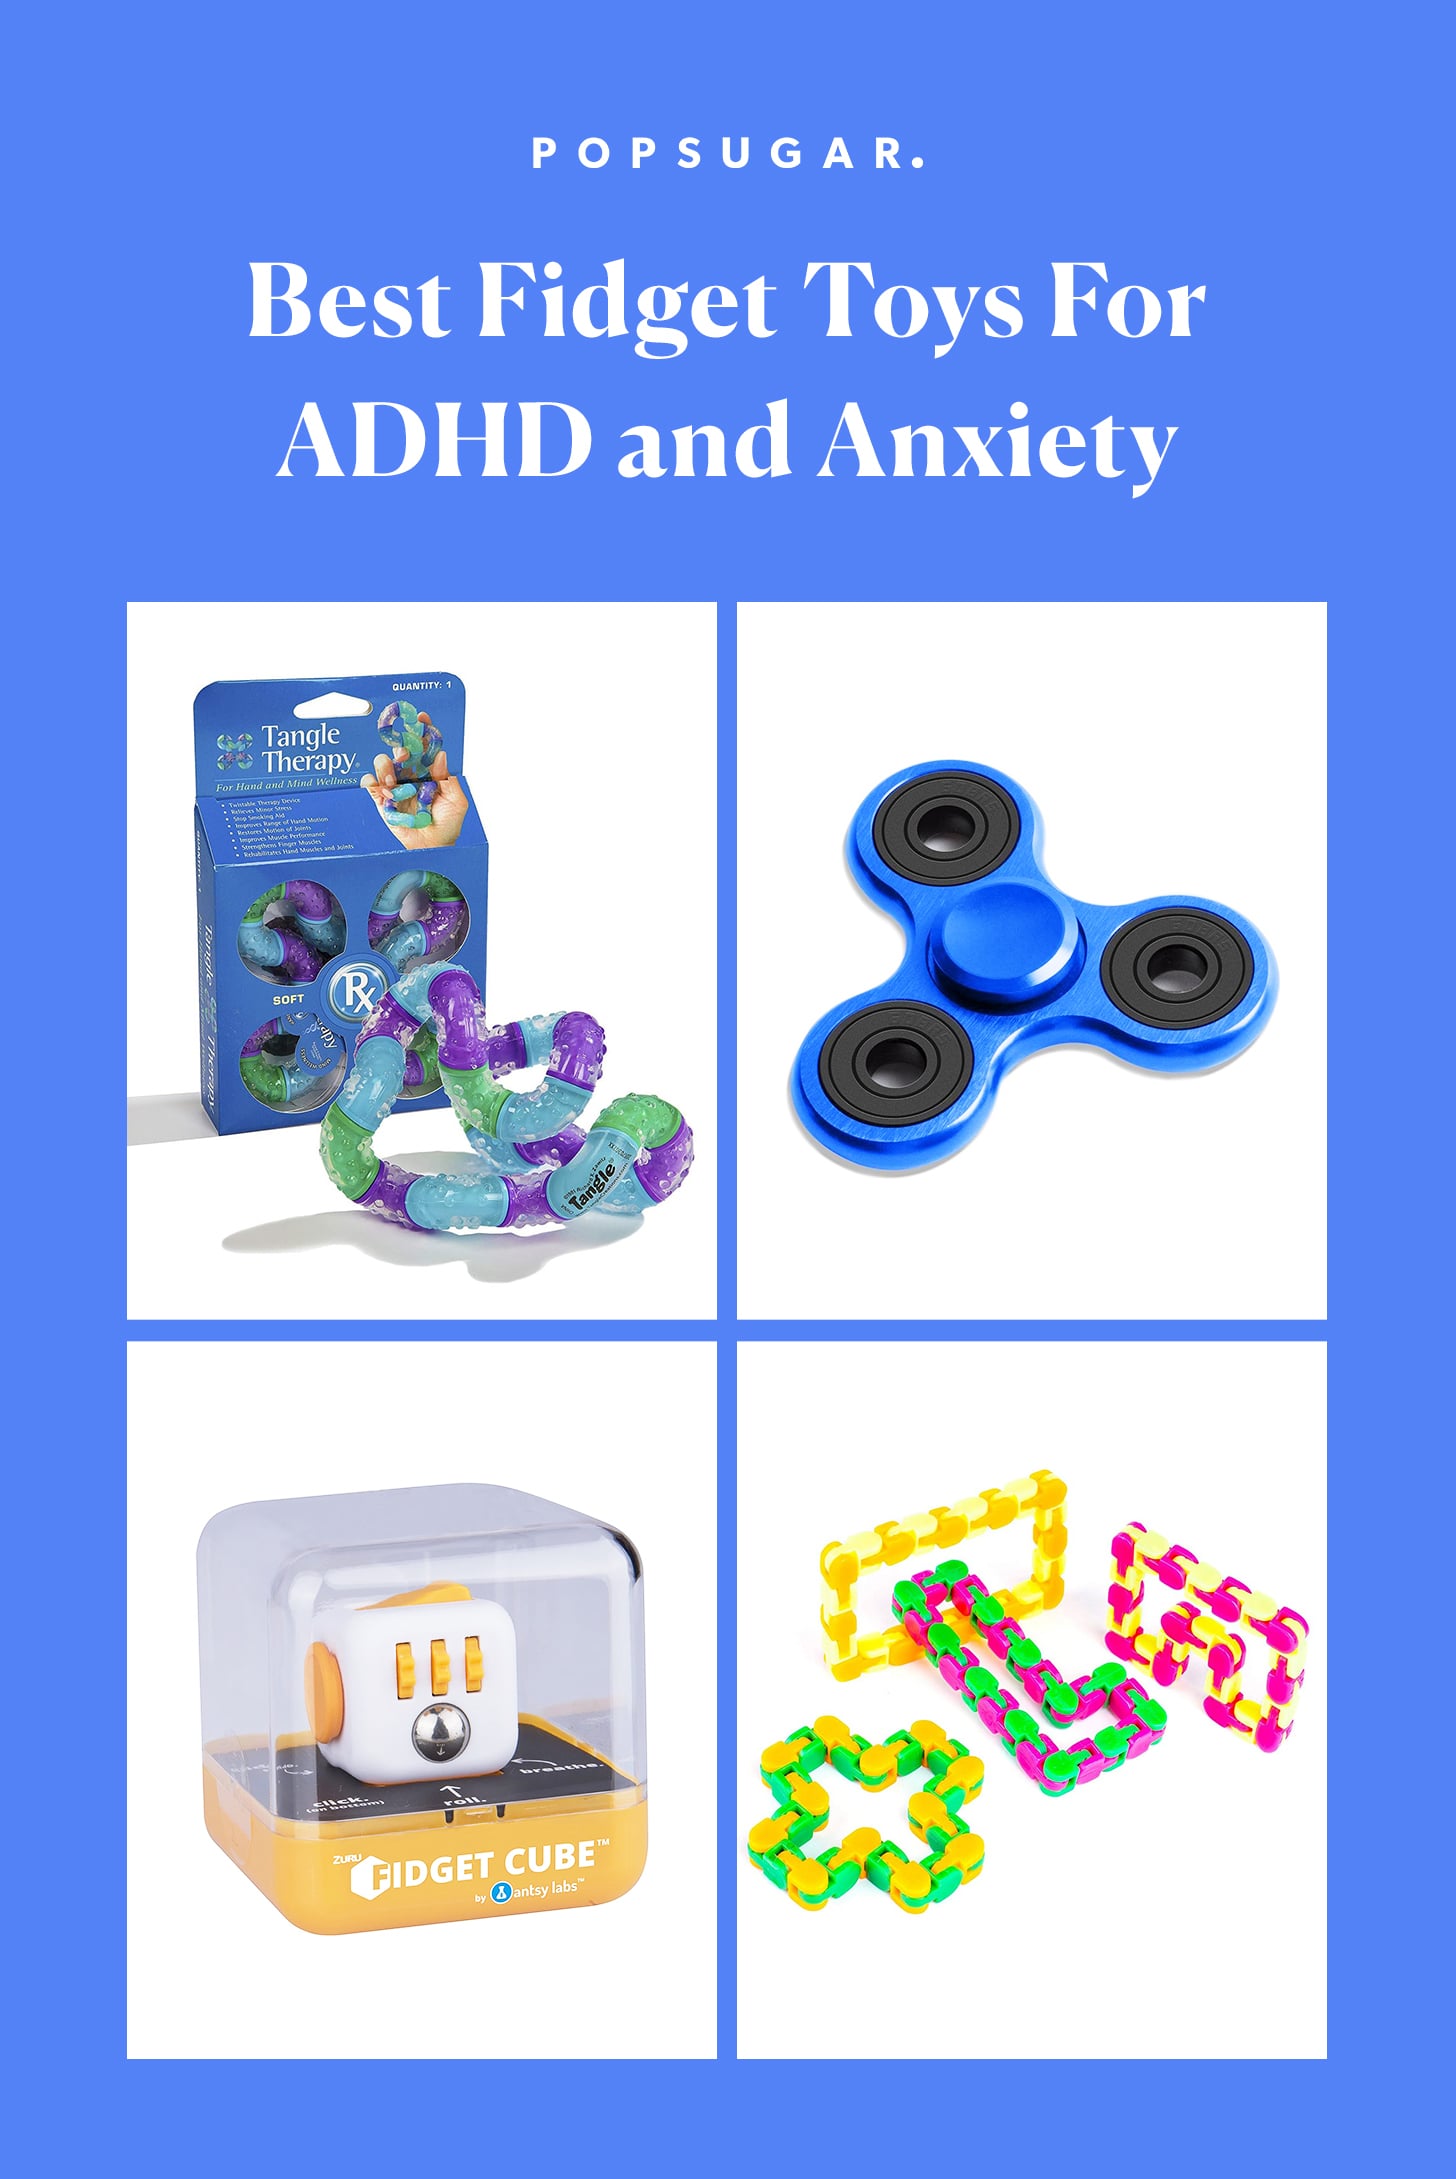 HMILYDYK Premium Flippy Chain Fidget Toys for Children and Adults with AHD OCD ADHD AUTISM Relieves Stress and Increases Focus 